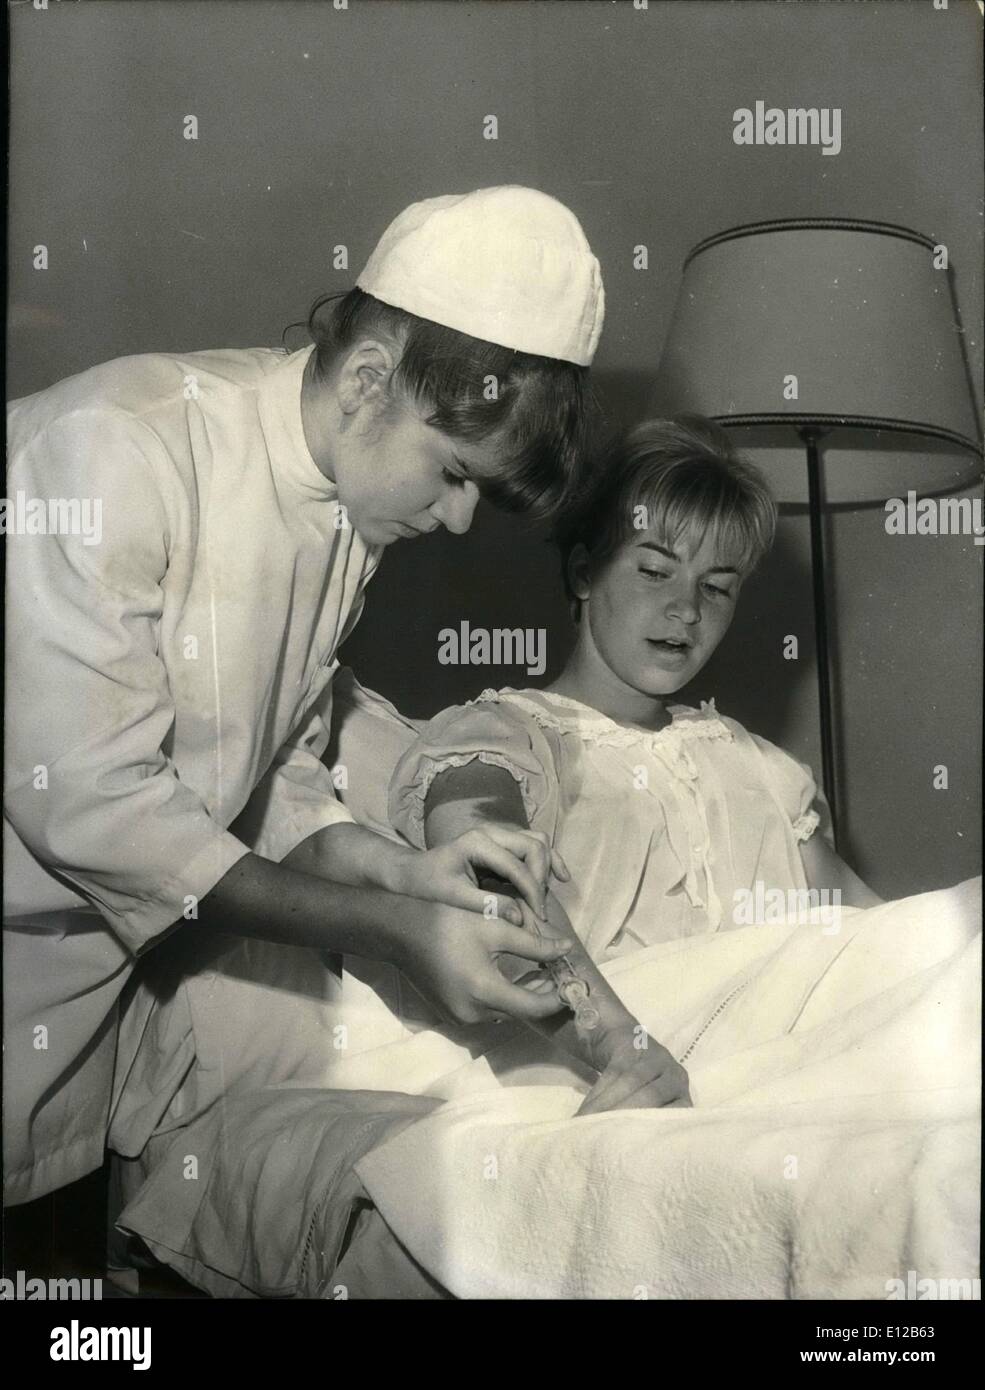 Dec. 09, 2011 - Minou Drouet wants to be a nurse. Minour Drouet who achieved fame as a child poet (she started writing poem when she was 8) is now training as a hospital nurse. OPS: Minou Drouet pictured with patients in a hospital near Paris. Oct. 13/65 Stock Photo